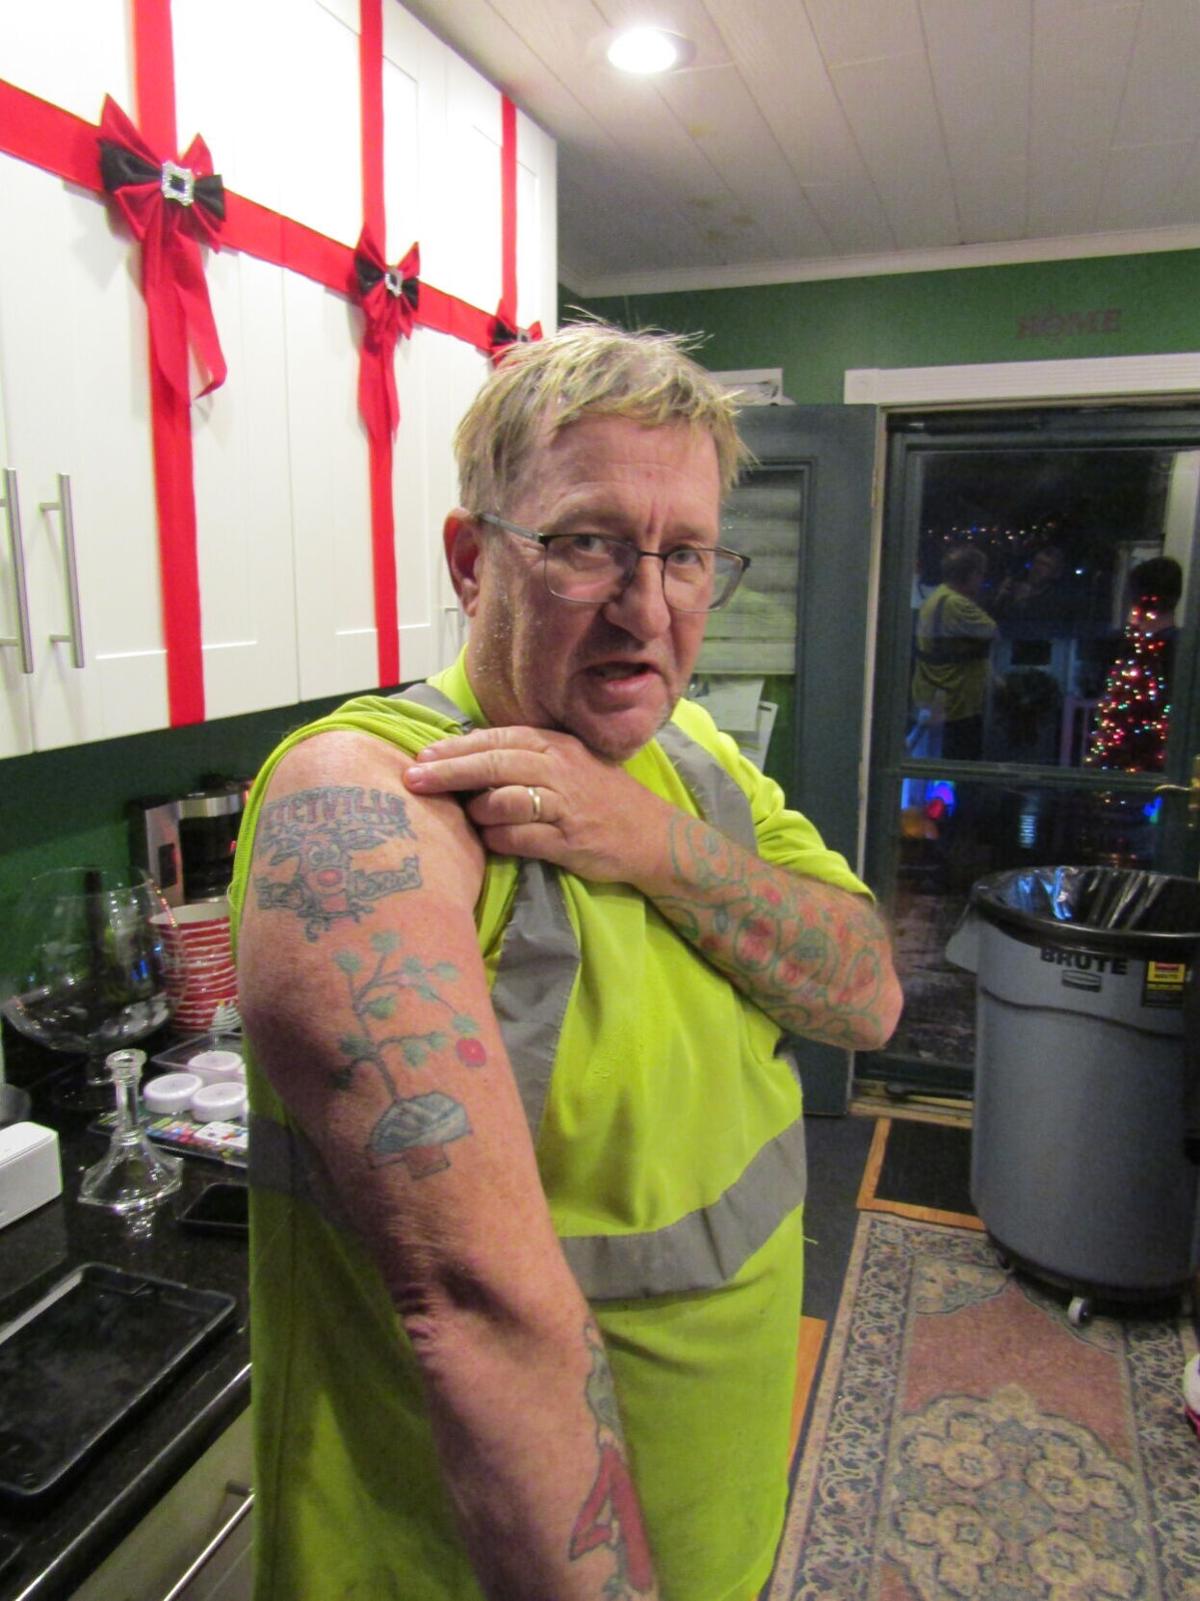 Peteyville founder's love of Christmas extends to arm tattoos: 'I'm going  to take it to the grave